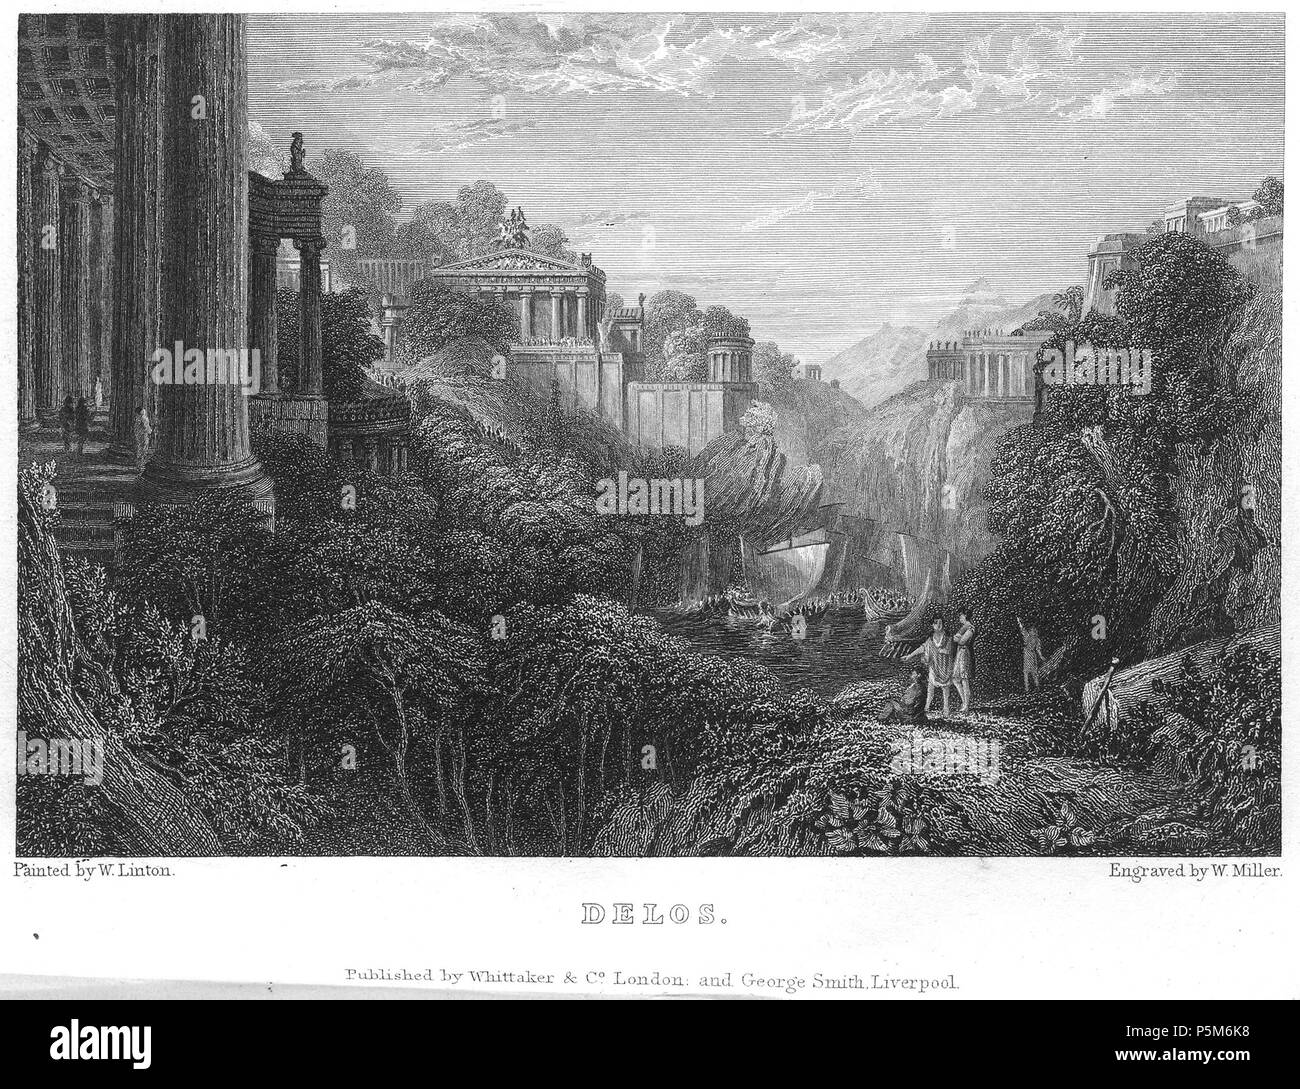 N/A. Delos engraving by William Miller after W Linton, (date of engraving 1830, paid £31-10-0) published in The Winter's Wreath for MDCCCXXXI. A Collection of Original Contributions in Prose and Verse. London: Published by George B. Whitaker; and George Smith, Liverpool. 1831 . 1831.   William Miller  (1796–1882)     Alternative names William Frederick I Miller; William Frederick, I Miller  Description Scottish engraver  Date of birth/death 28 May 1796 20 January 1882  Location of birth/death Edinburgh Sheffield  Authority control  : Q2580014 VIAF:75215312 ISNI:0000 0000 6708 7623 ULAN:5000032 Stock Photo